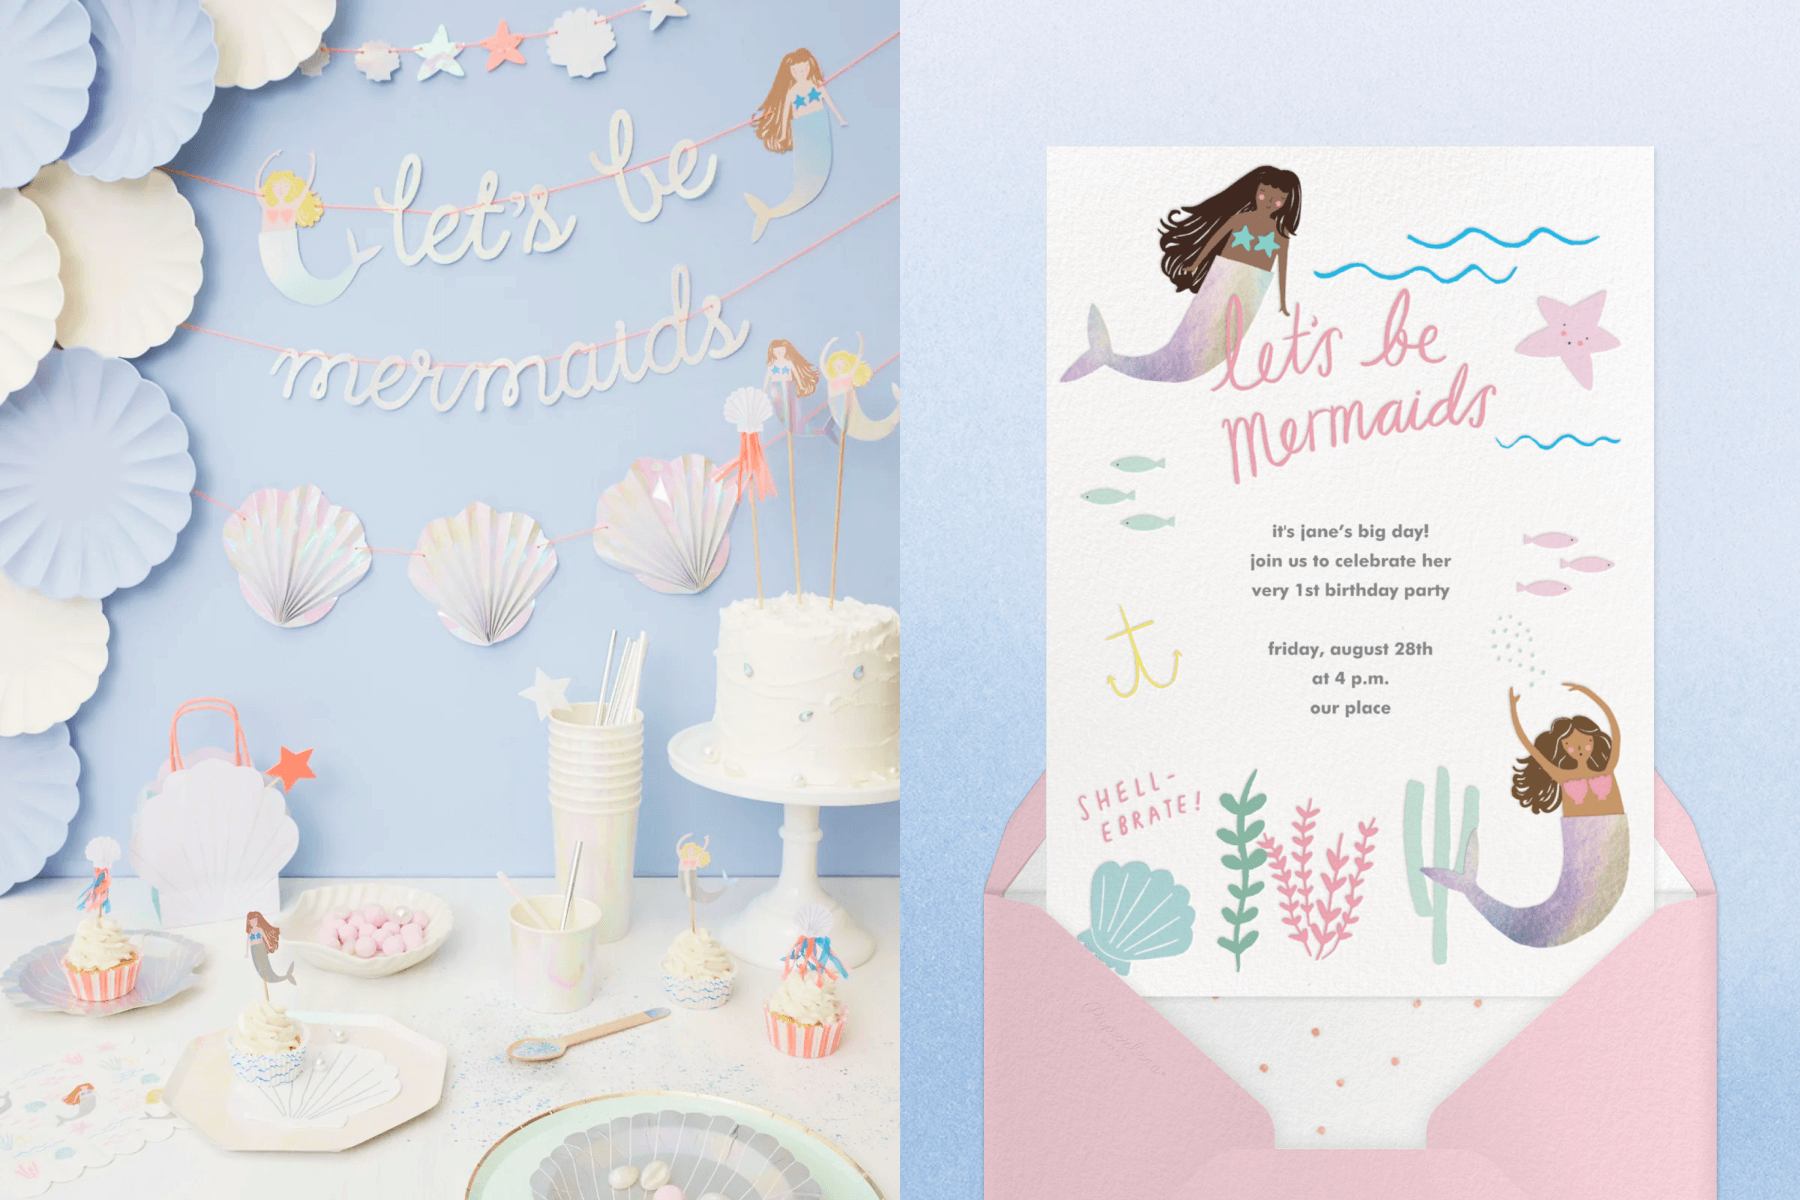 Left: A table set for a mermaid party with light blue walls, scallop shell bunting, mermaid cake decorations, and cupcakes. Right: A birthday invitation reads “Let’s be mermaids” and “shell-ebrate” with two illustrated mermaids among fish and sea life.